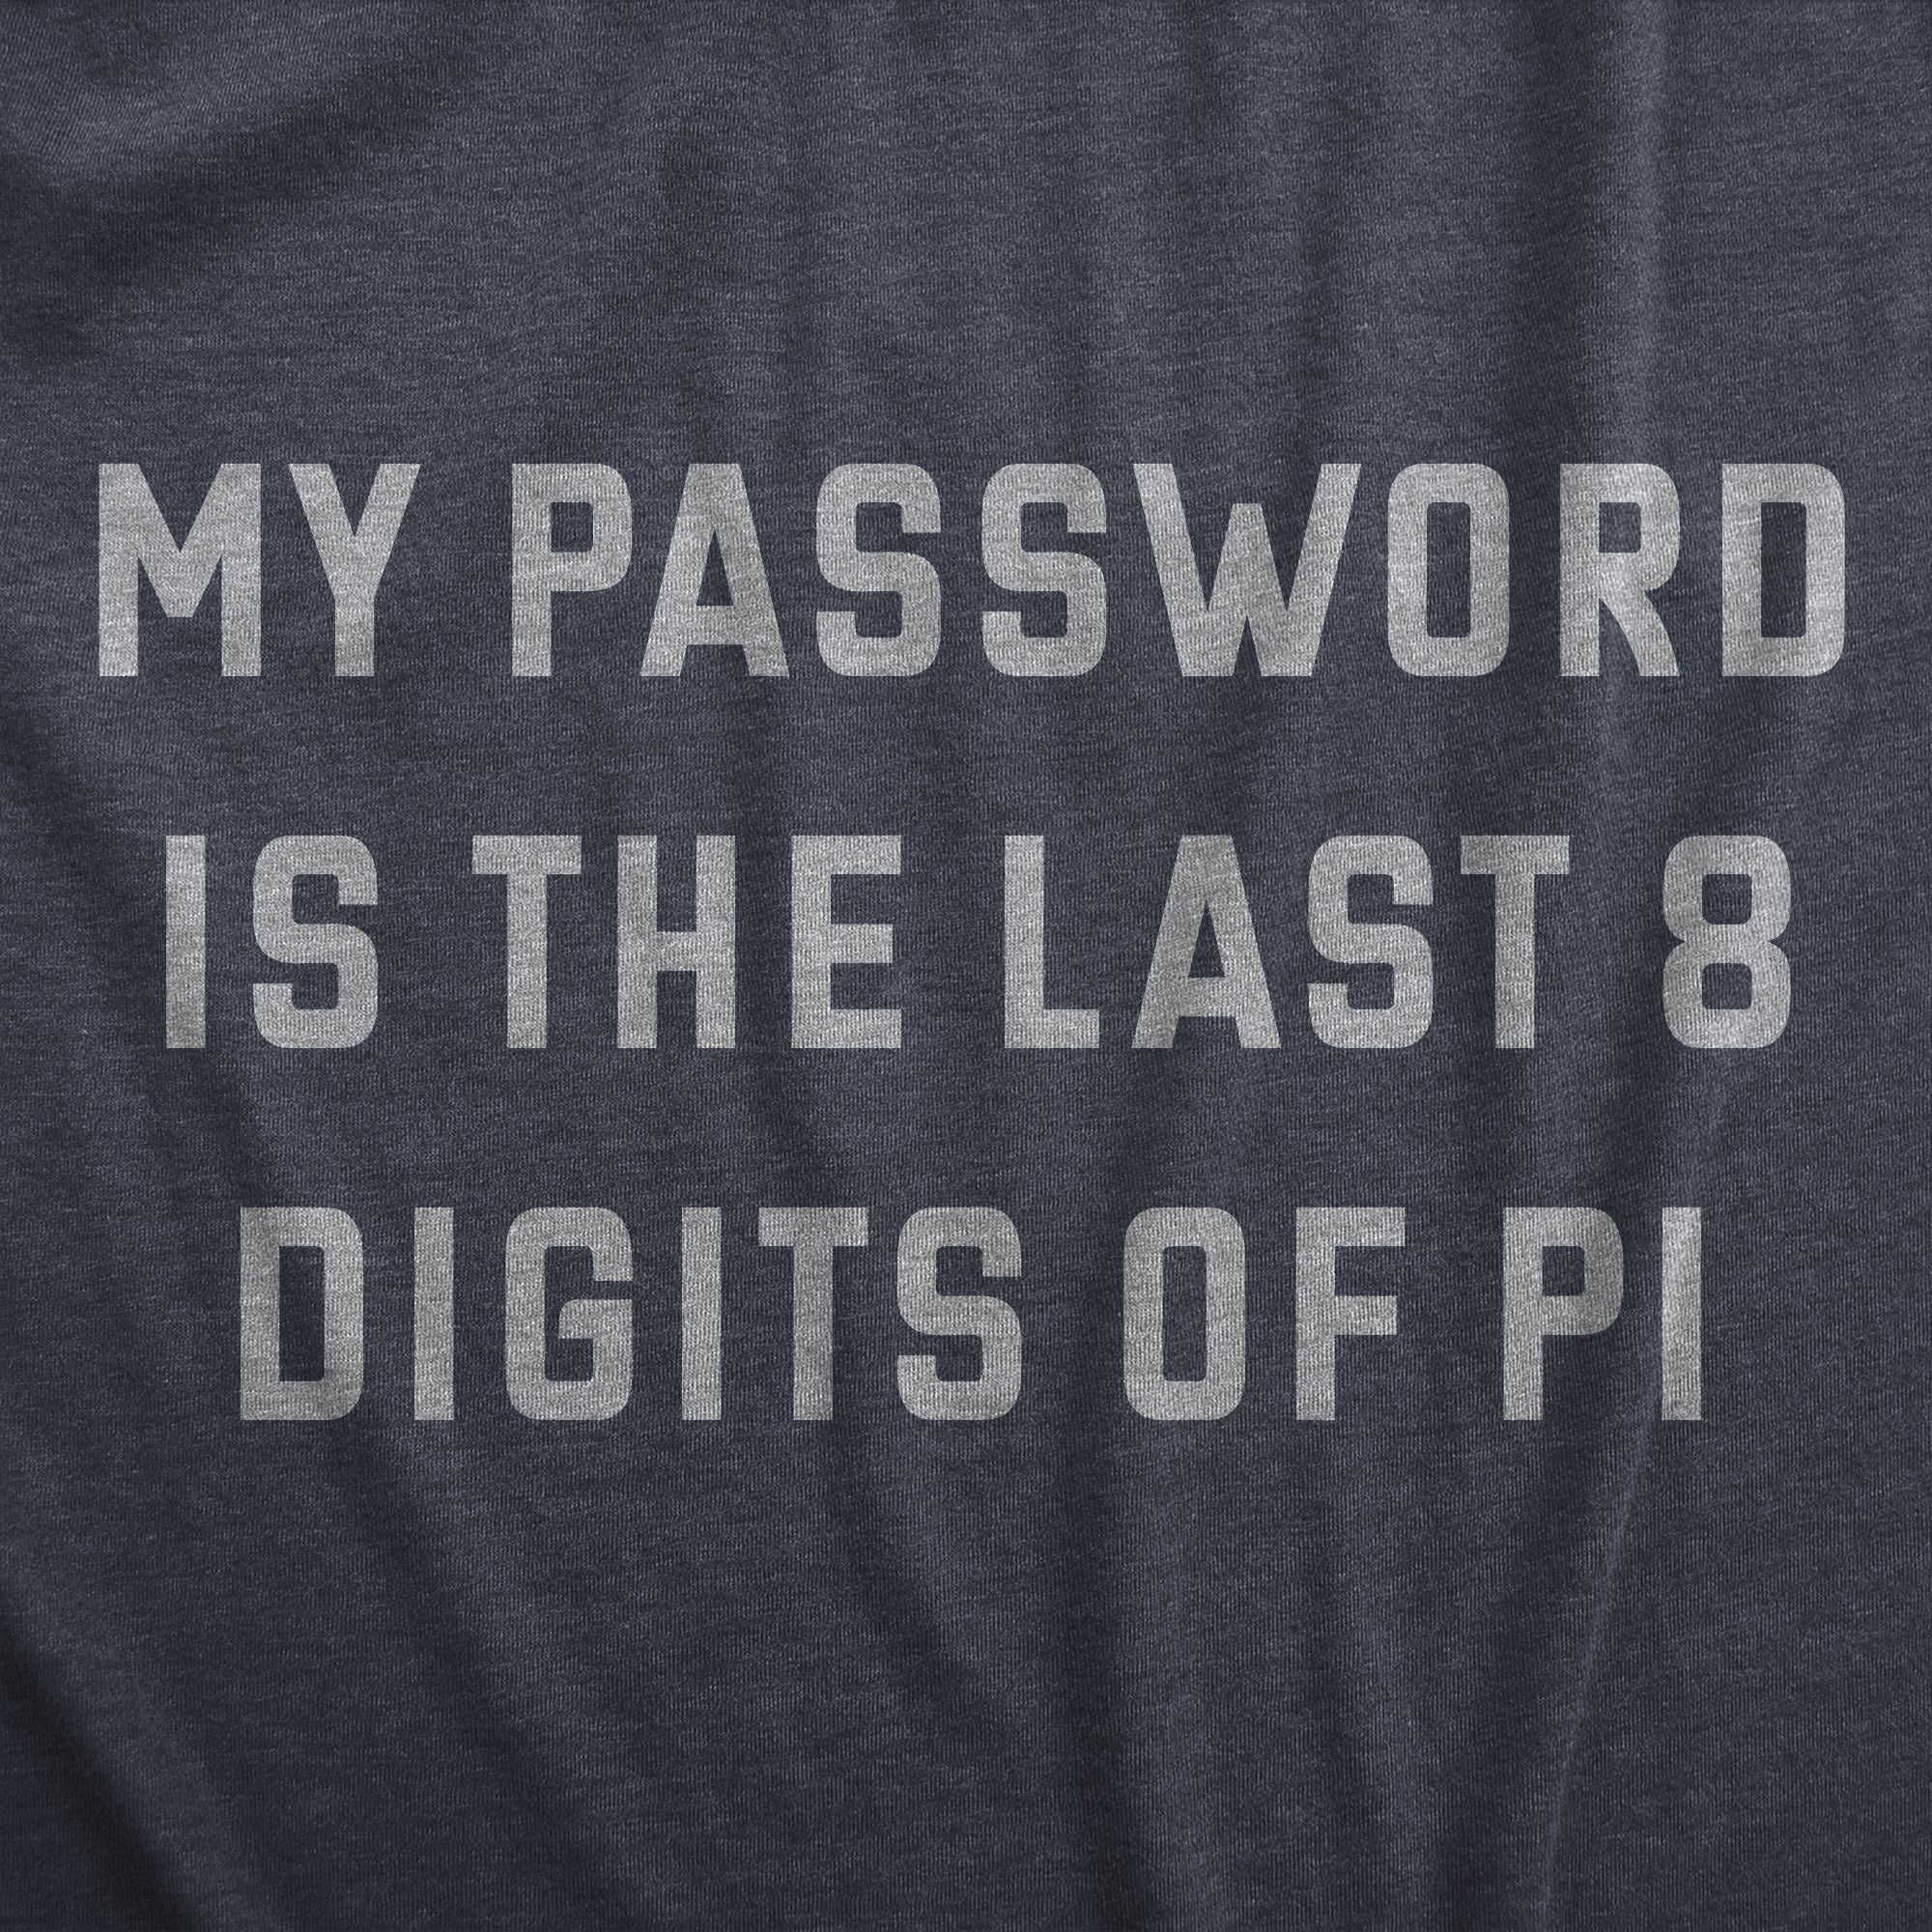 Funny Heather Navy - PASSWORD My Password Is The Last Eight Digits Of Pi Mens T Shirt Nerdy Nerdy Tee